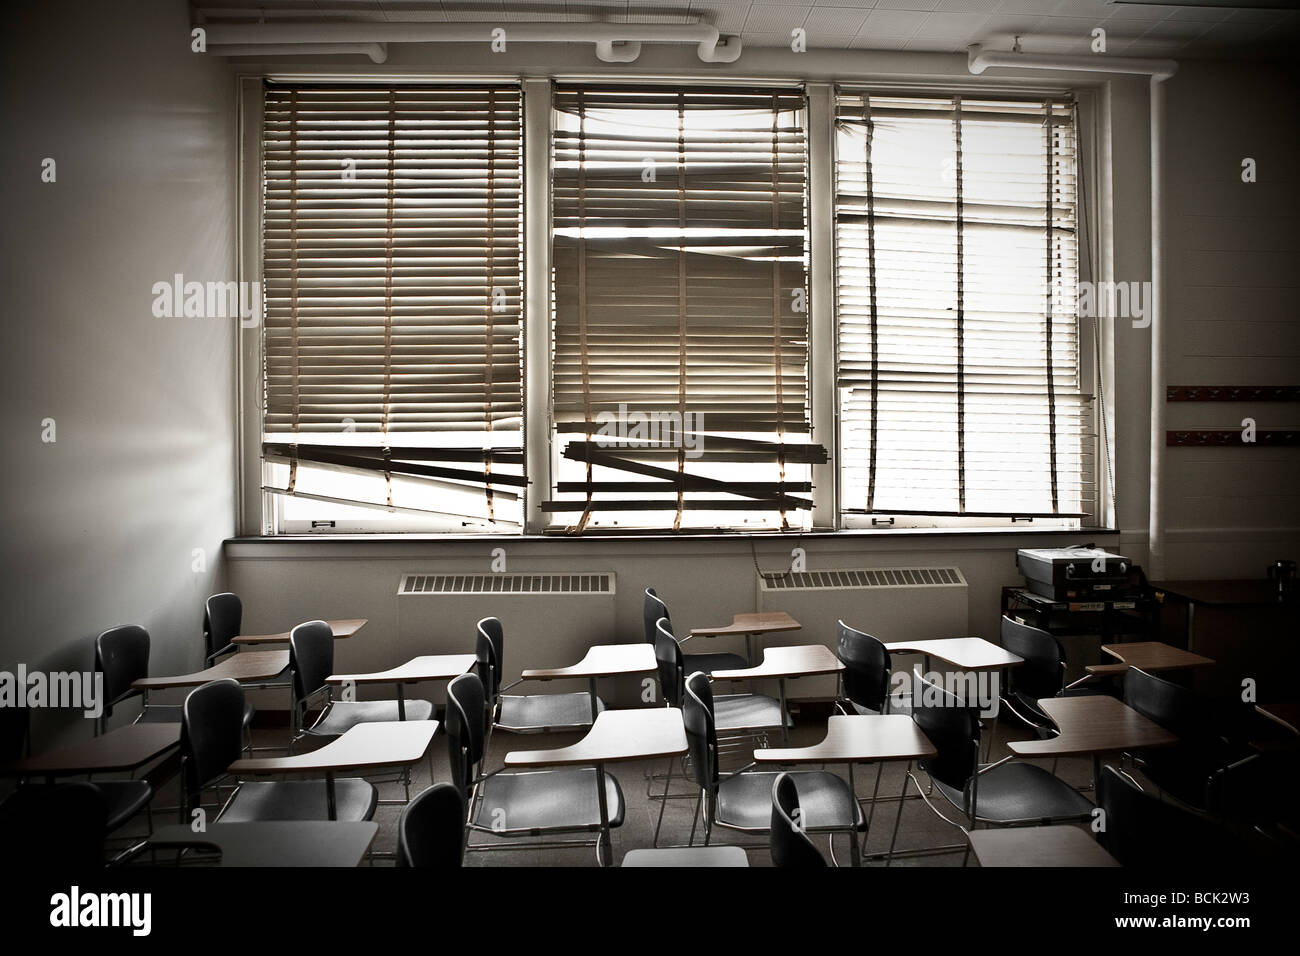 Old classroom with broken window blinds Stock Photo